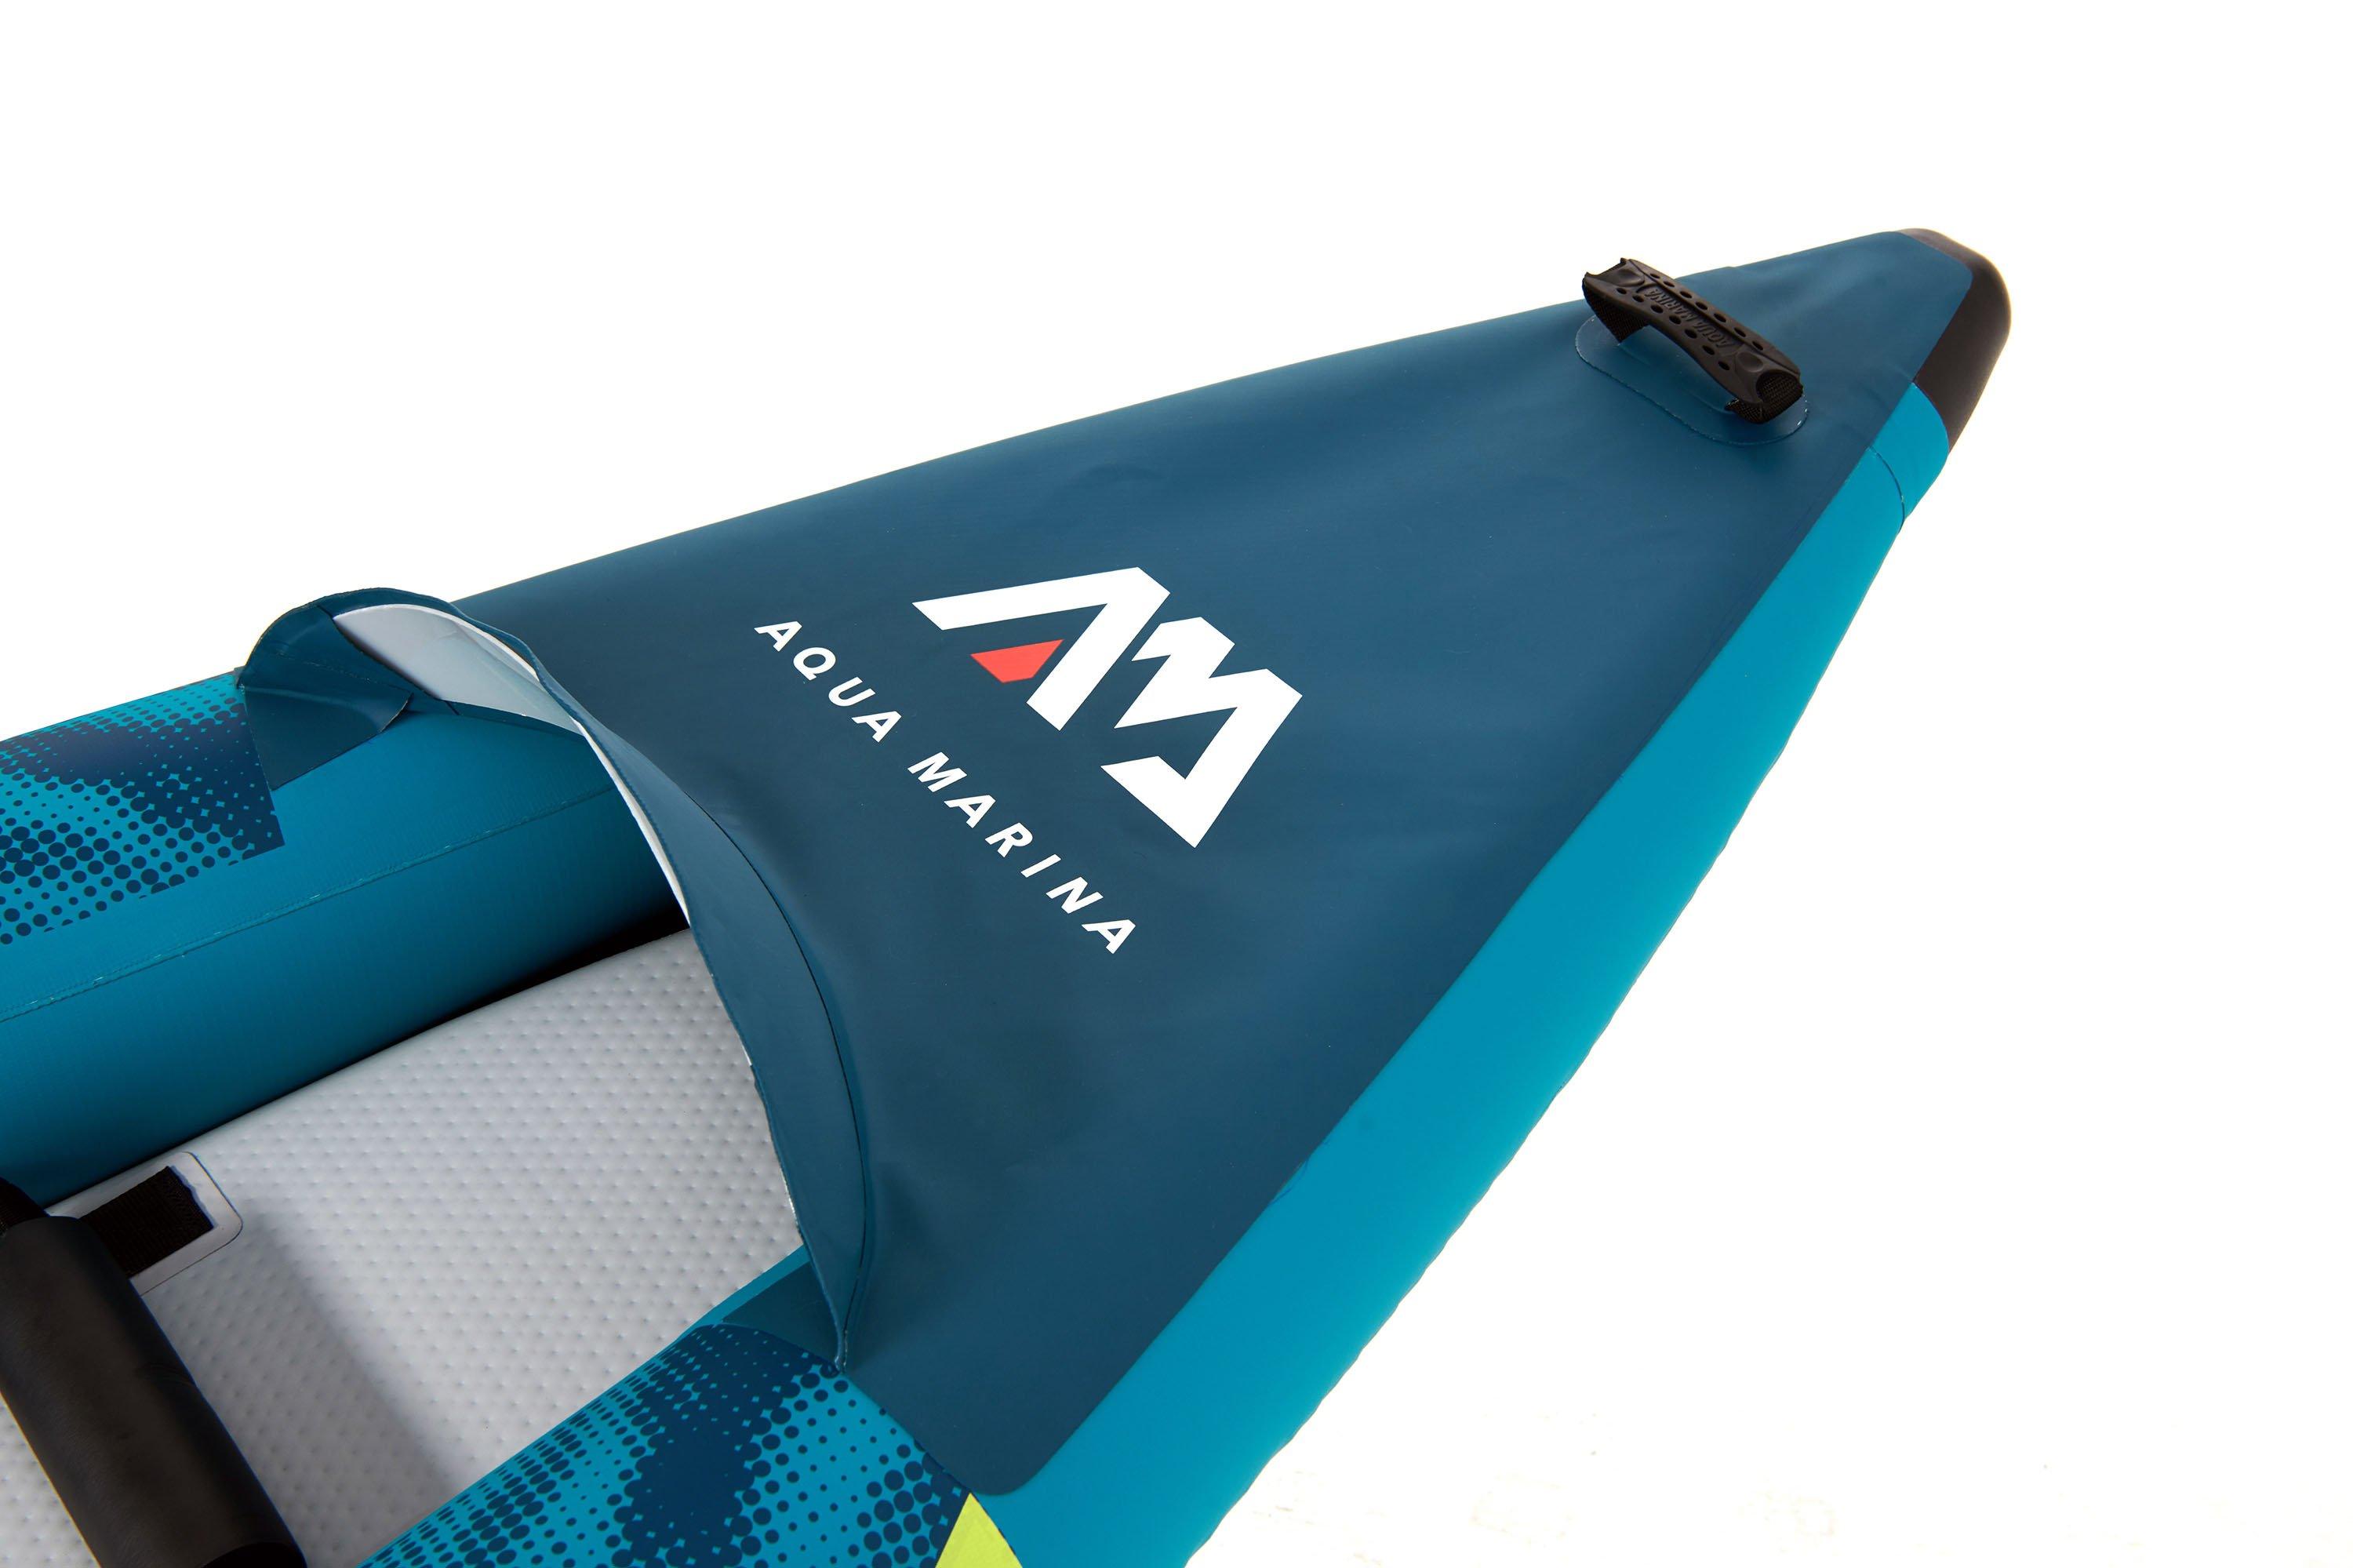 Steam 412 2-Person Kayak - DTI Direct Canada